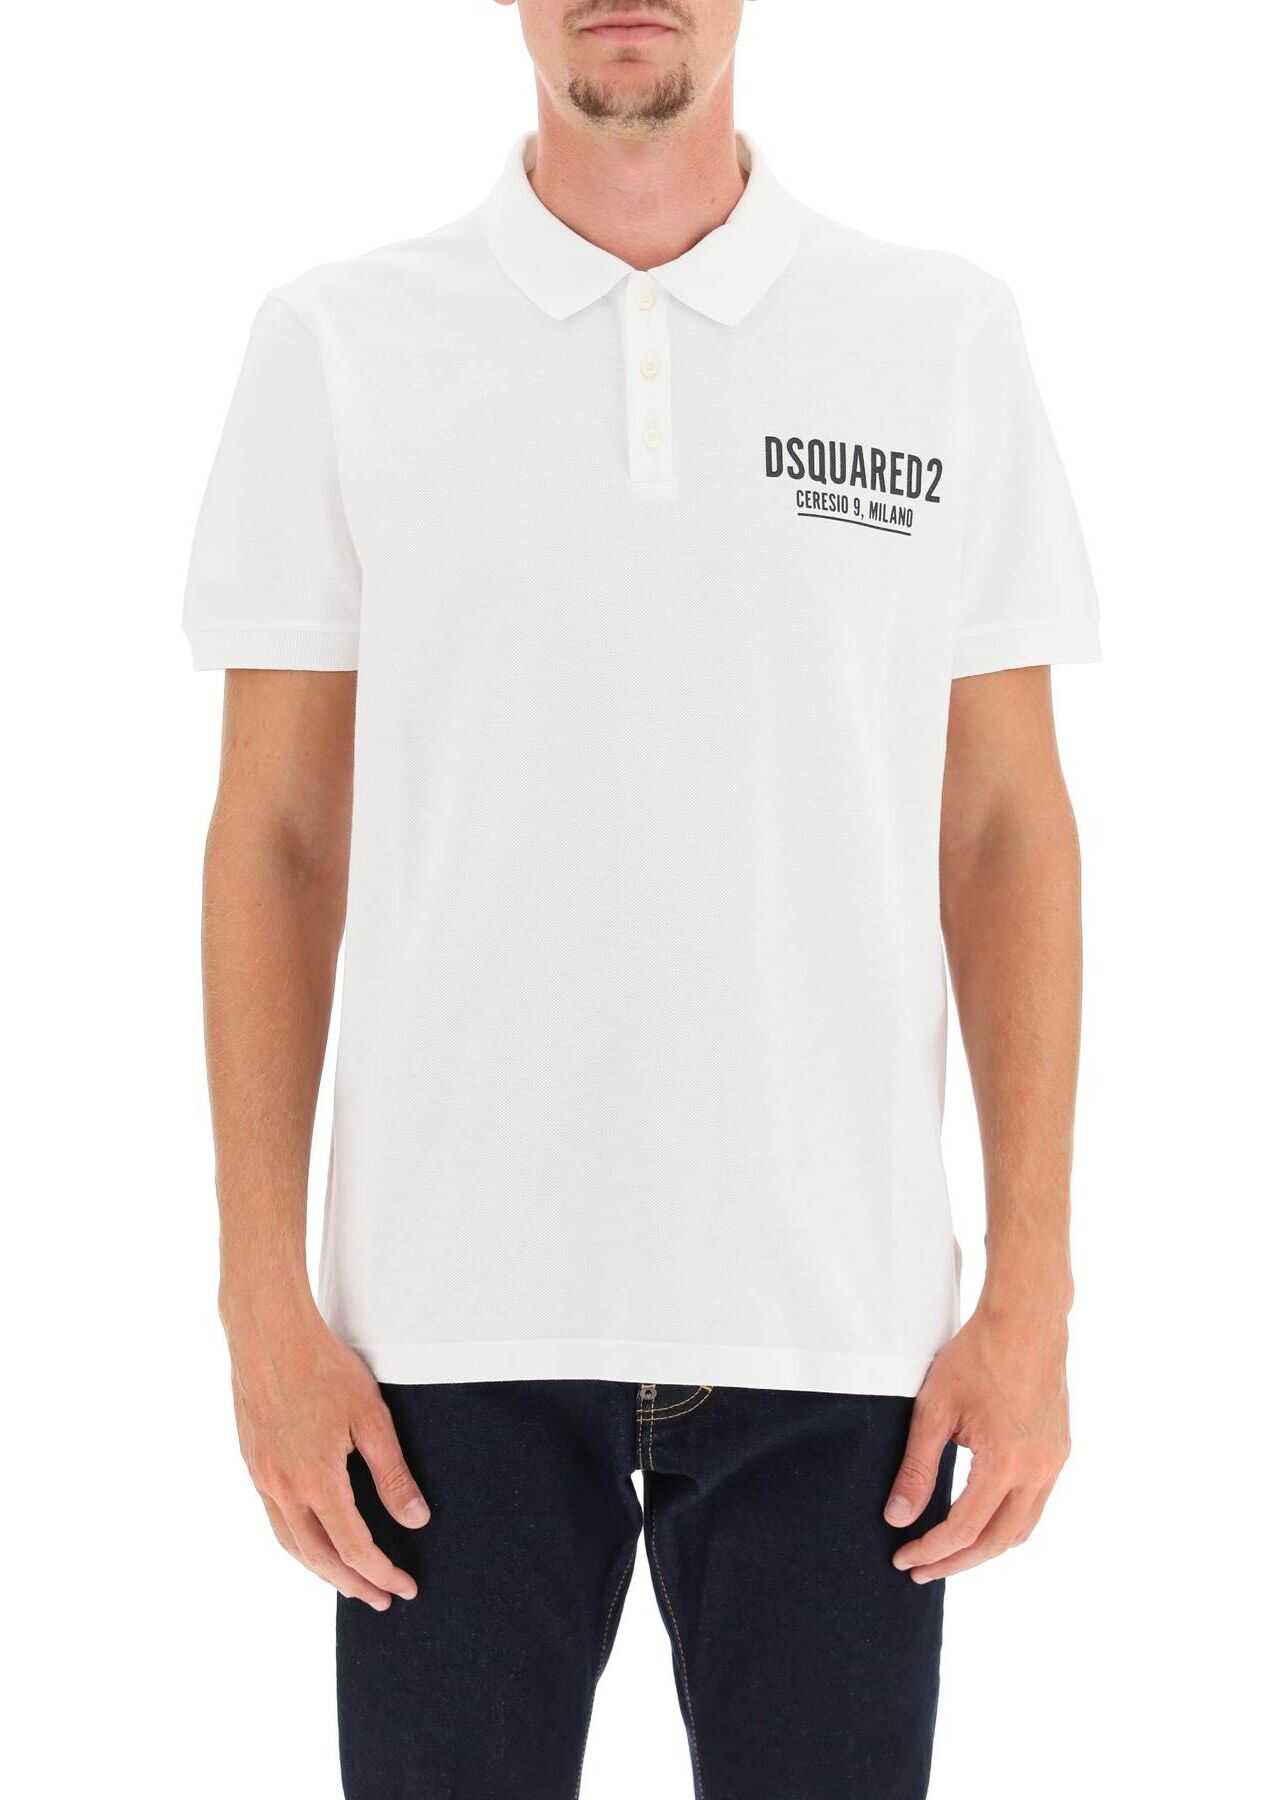 DSQUARED2 Polo Shirt With \'Ceresio 9\' Print S71GL0035 S22743 WHITE